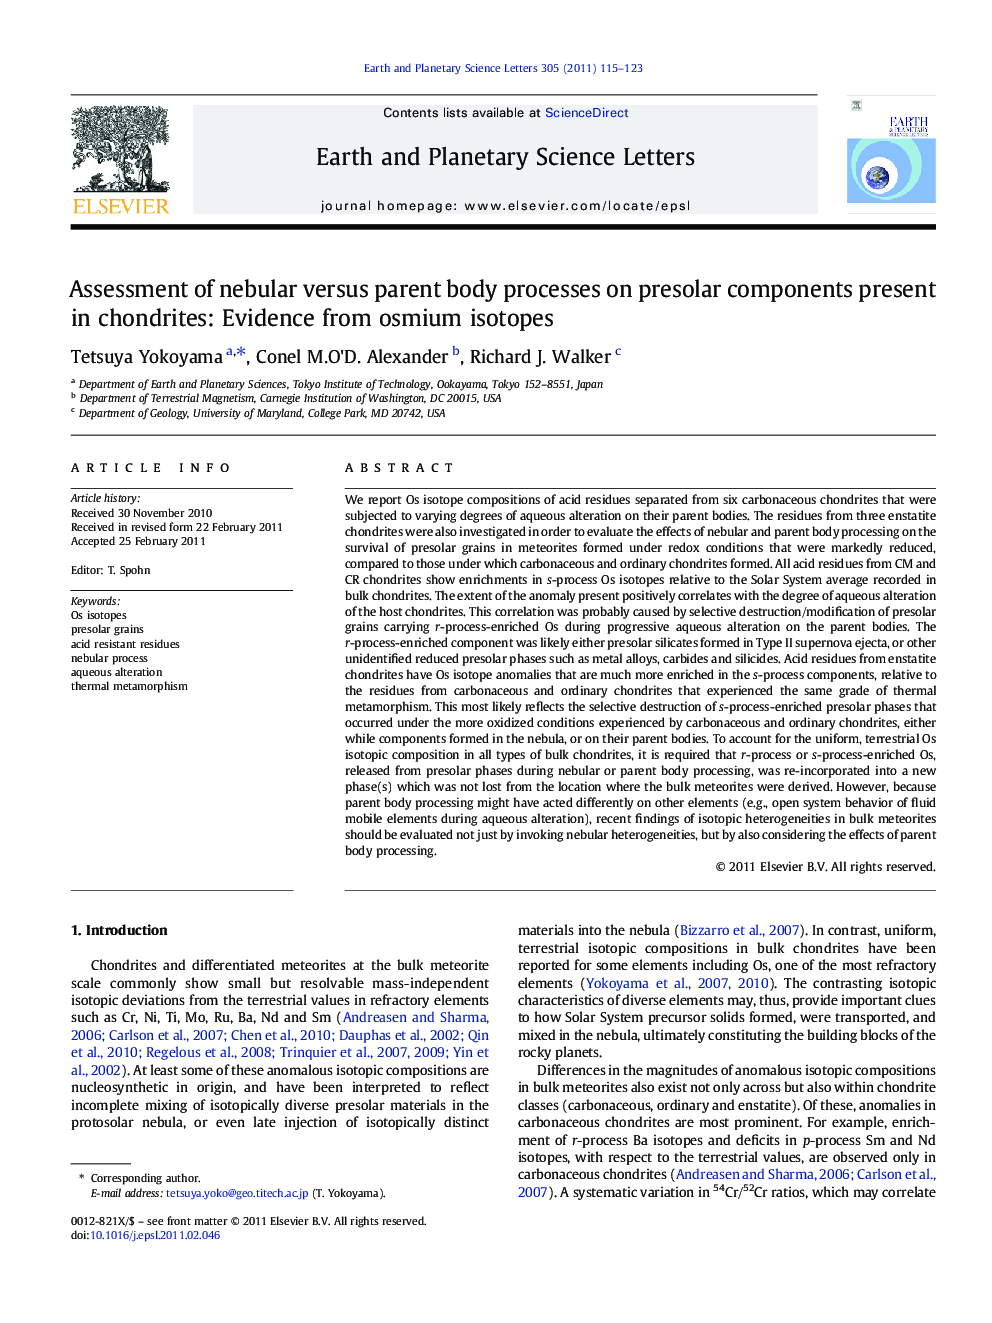 Assessment of nebular versus parent body processes on presolar components present in chondrites: Evidence from osmium isotopes